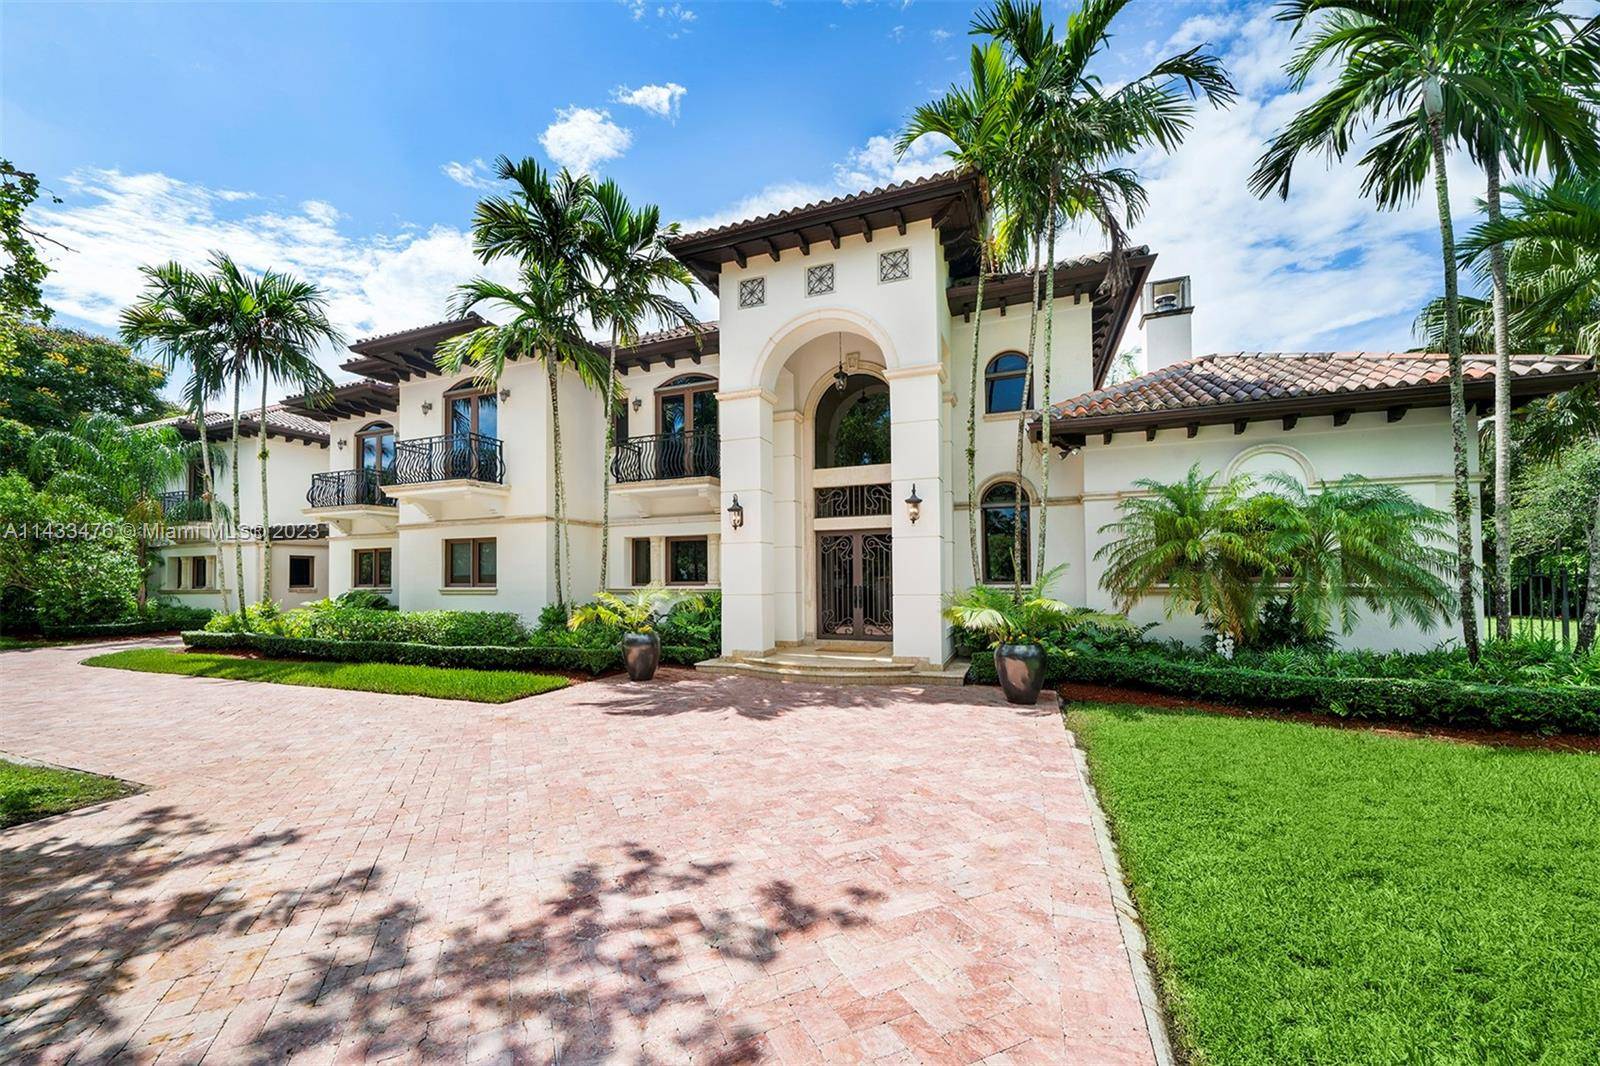 This attractive 9, 267 sf Pinecrest residence with 6 bedrooms and 7.